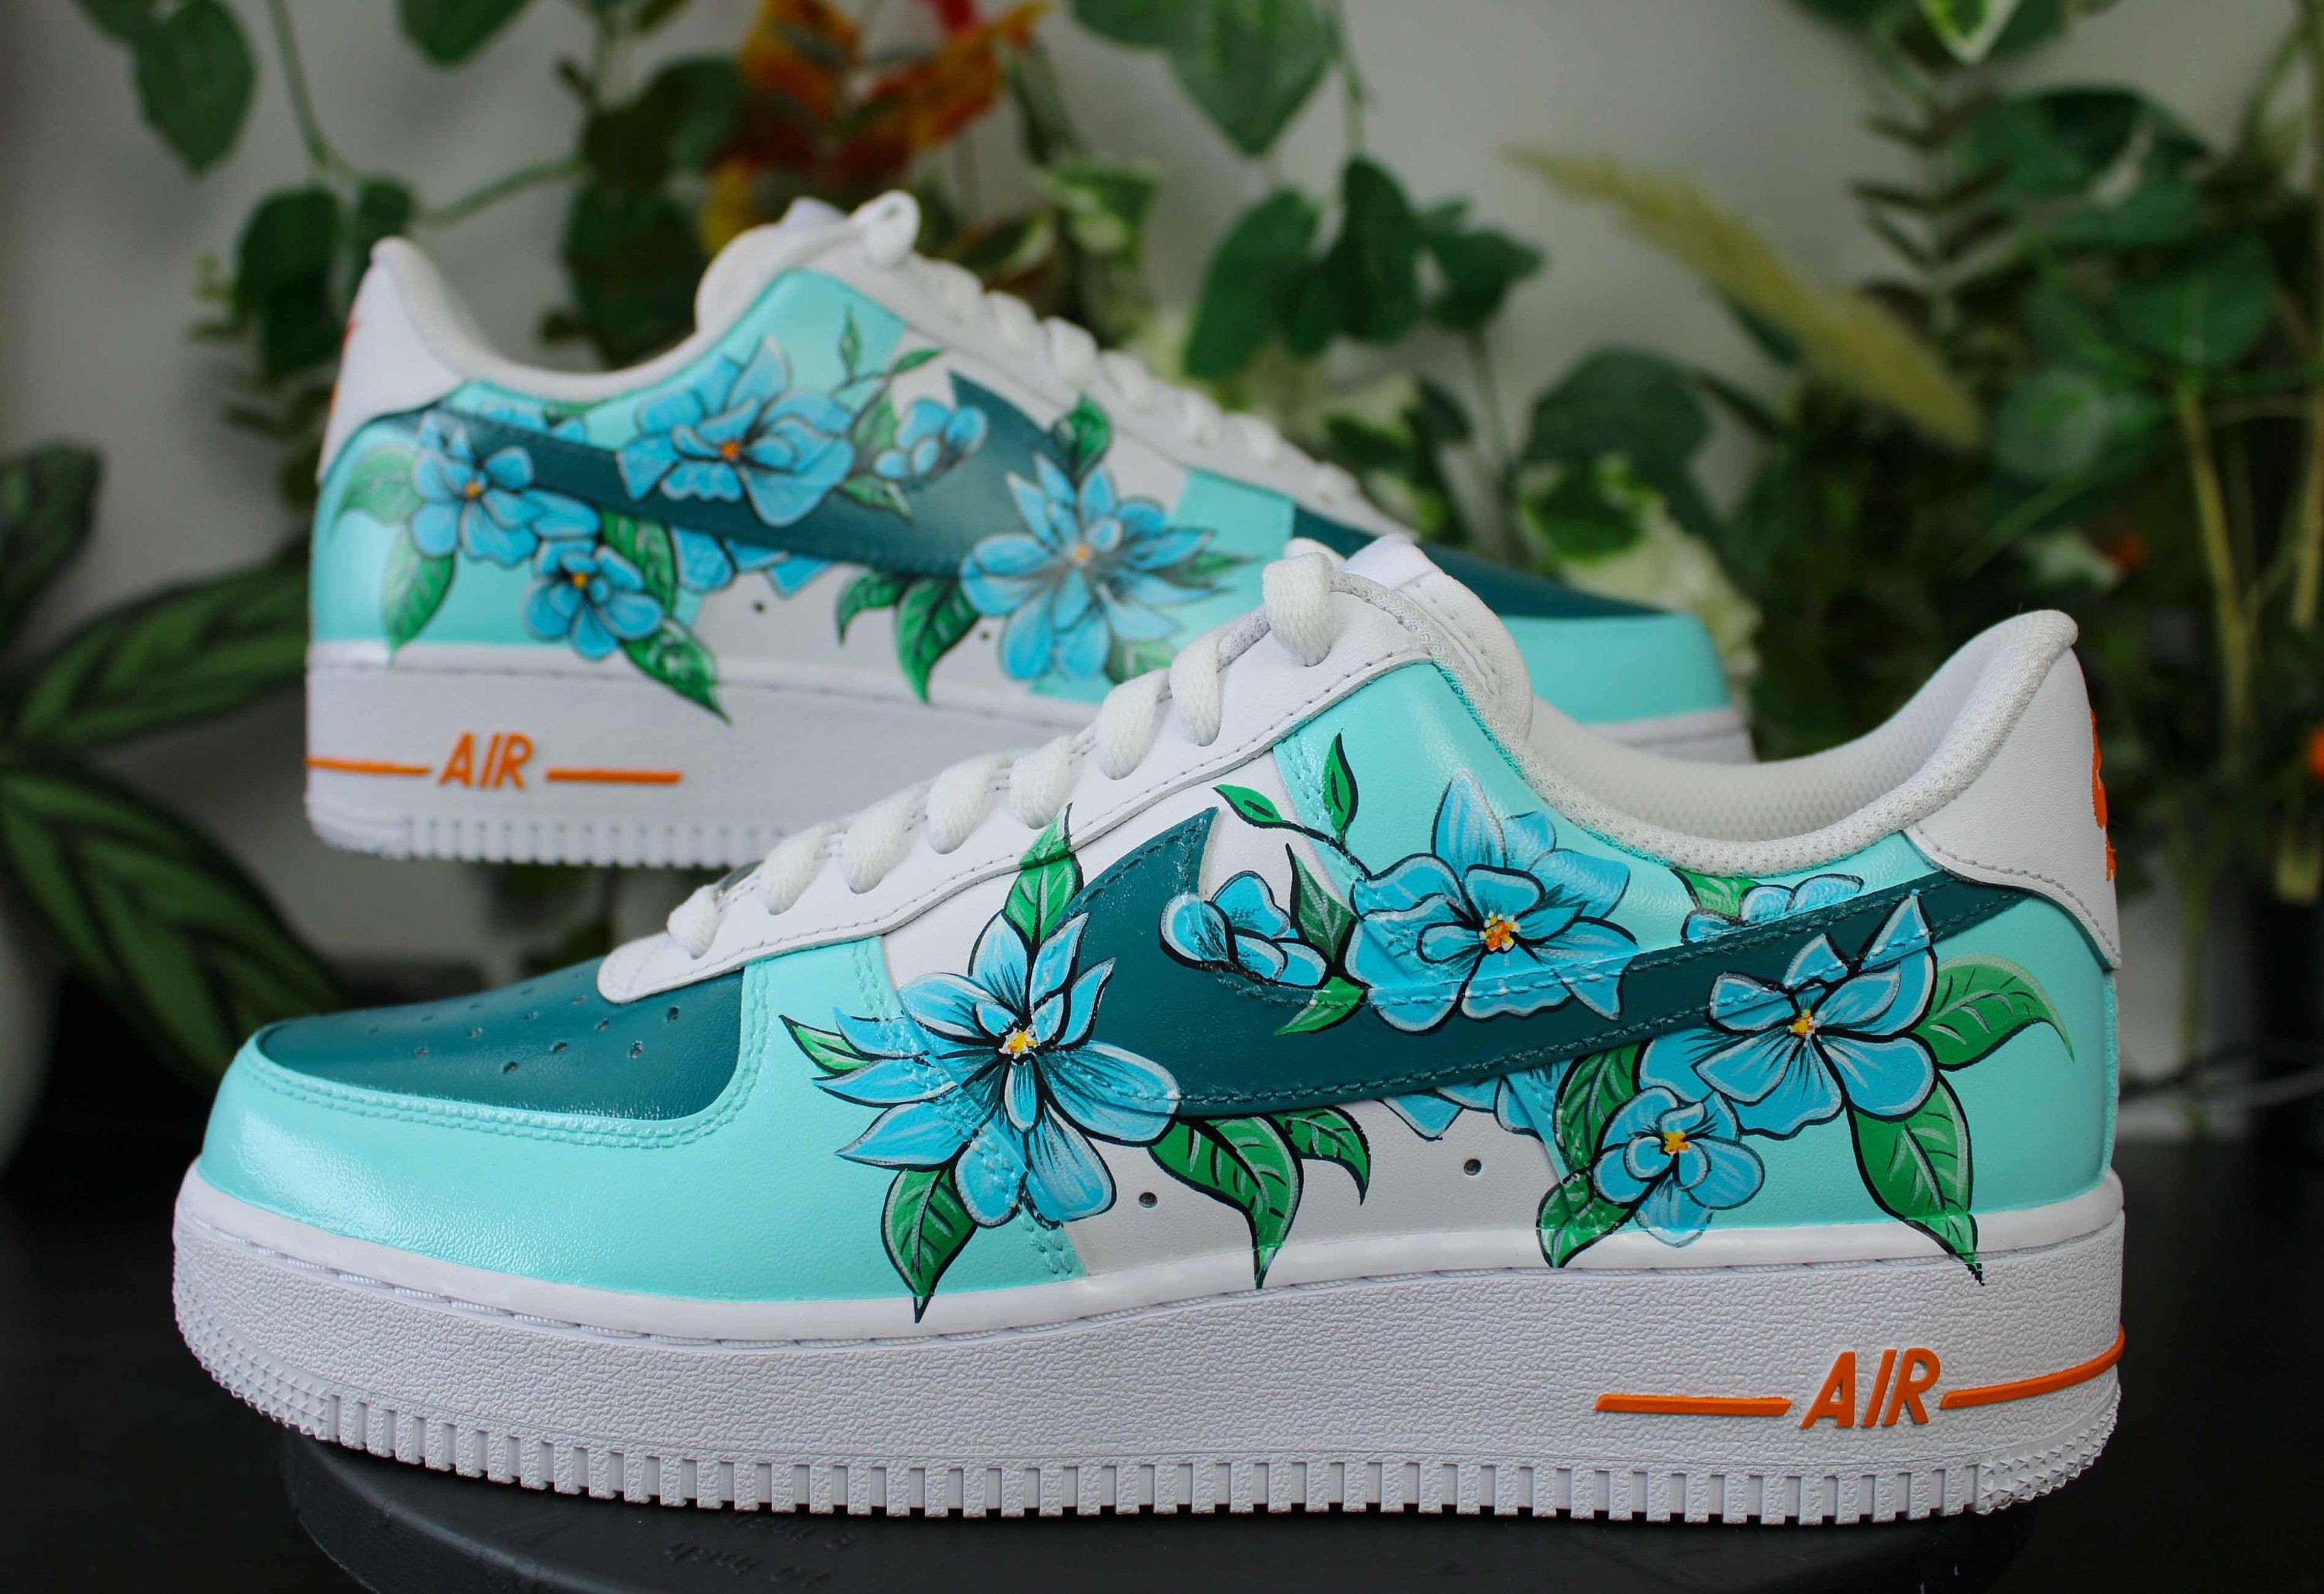 Air Force 1 Custom Low Pastel Multi Color Shoes Green Teal Red Yellow Pink Purple All Sizes Af1 Sneakers 14 Mens (15.5 Women's)